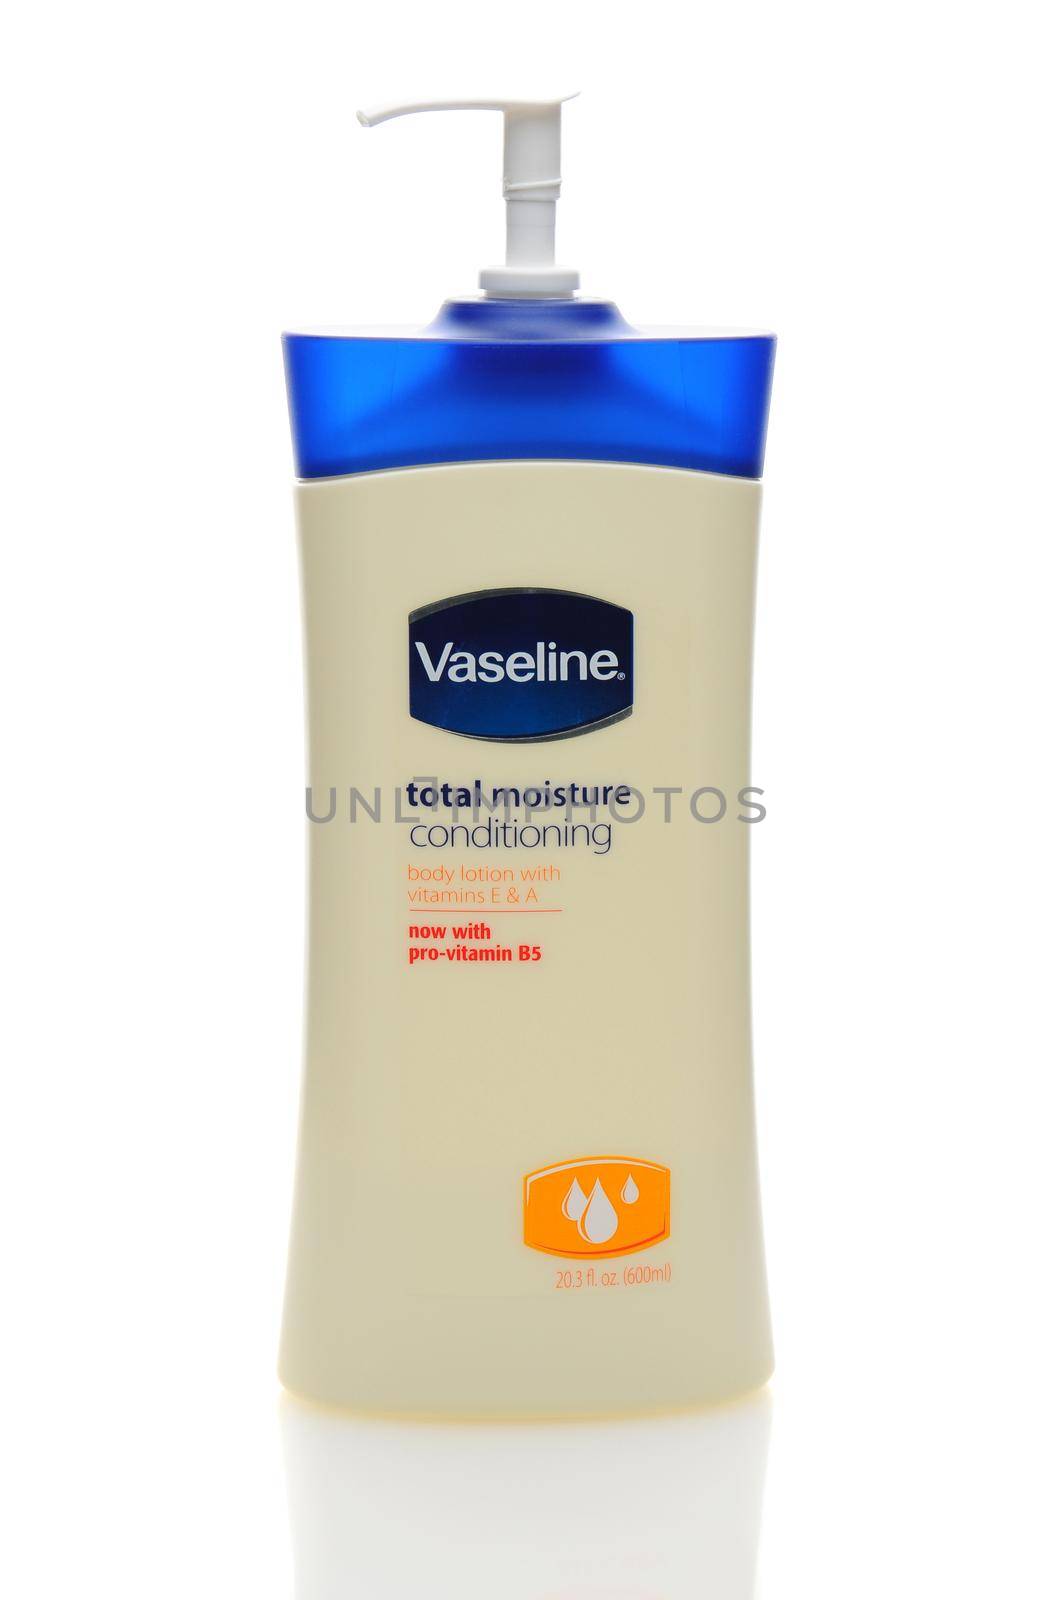 Single 20oz pump bottle of Vaseline Total Moisture Conditioning Lotion on a white background.